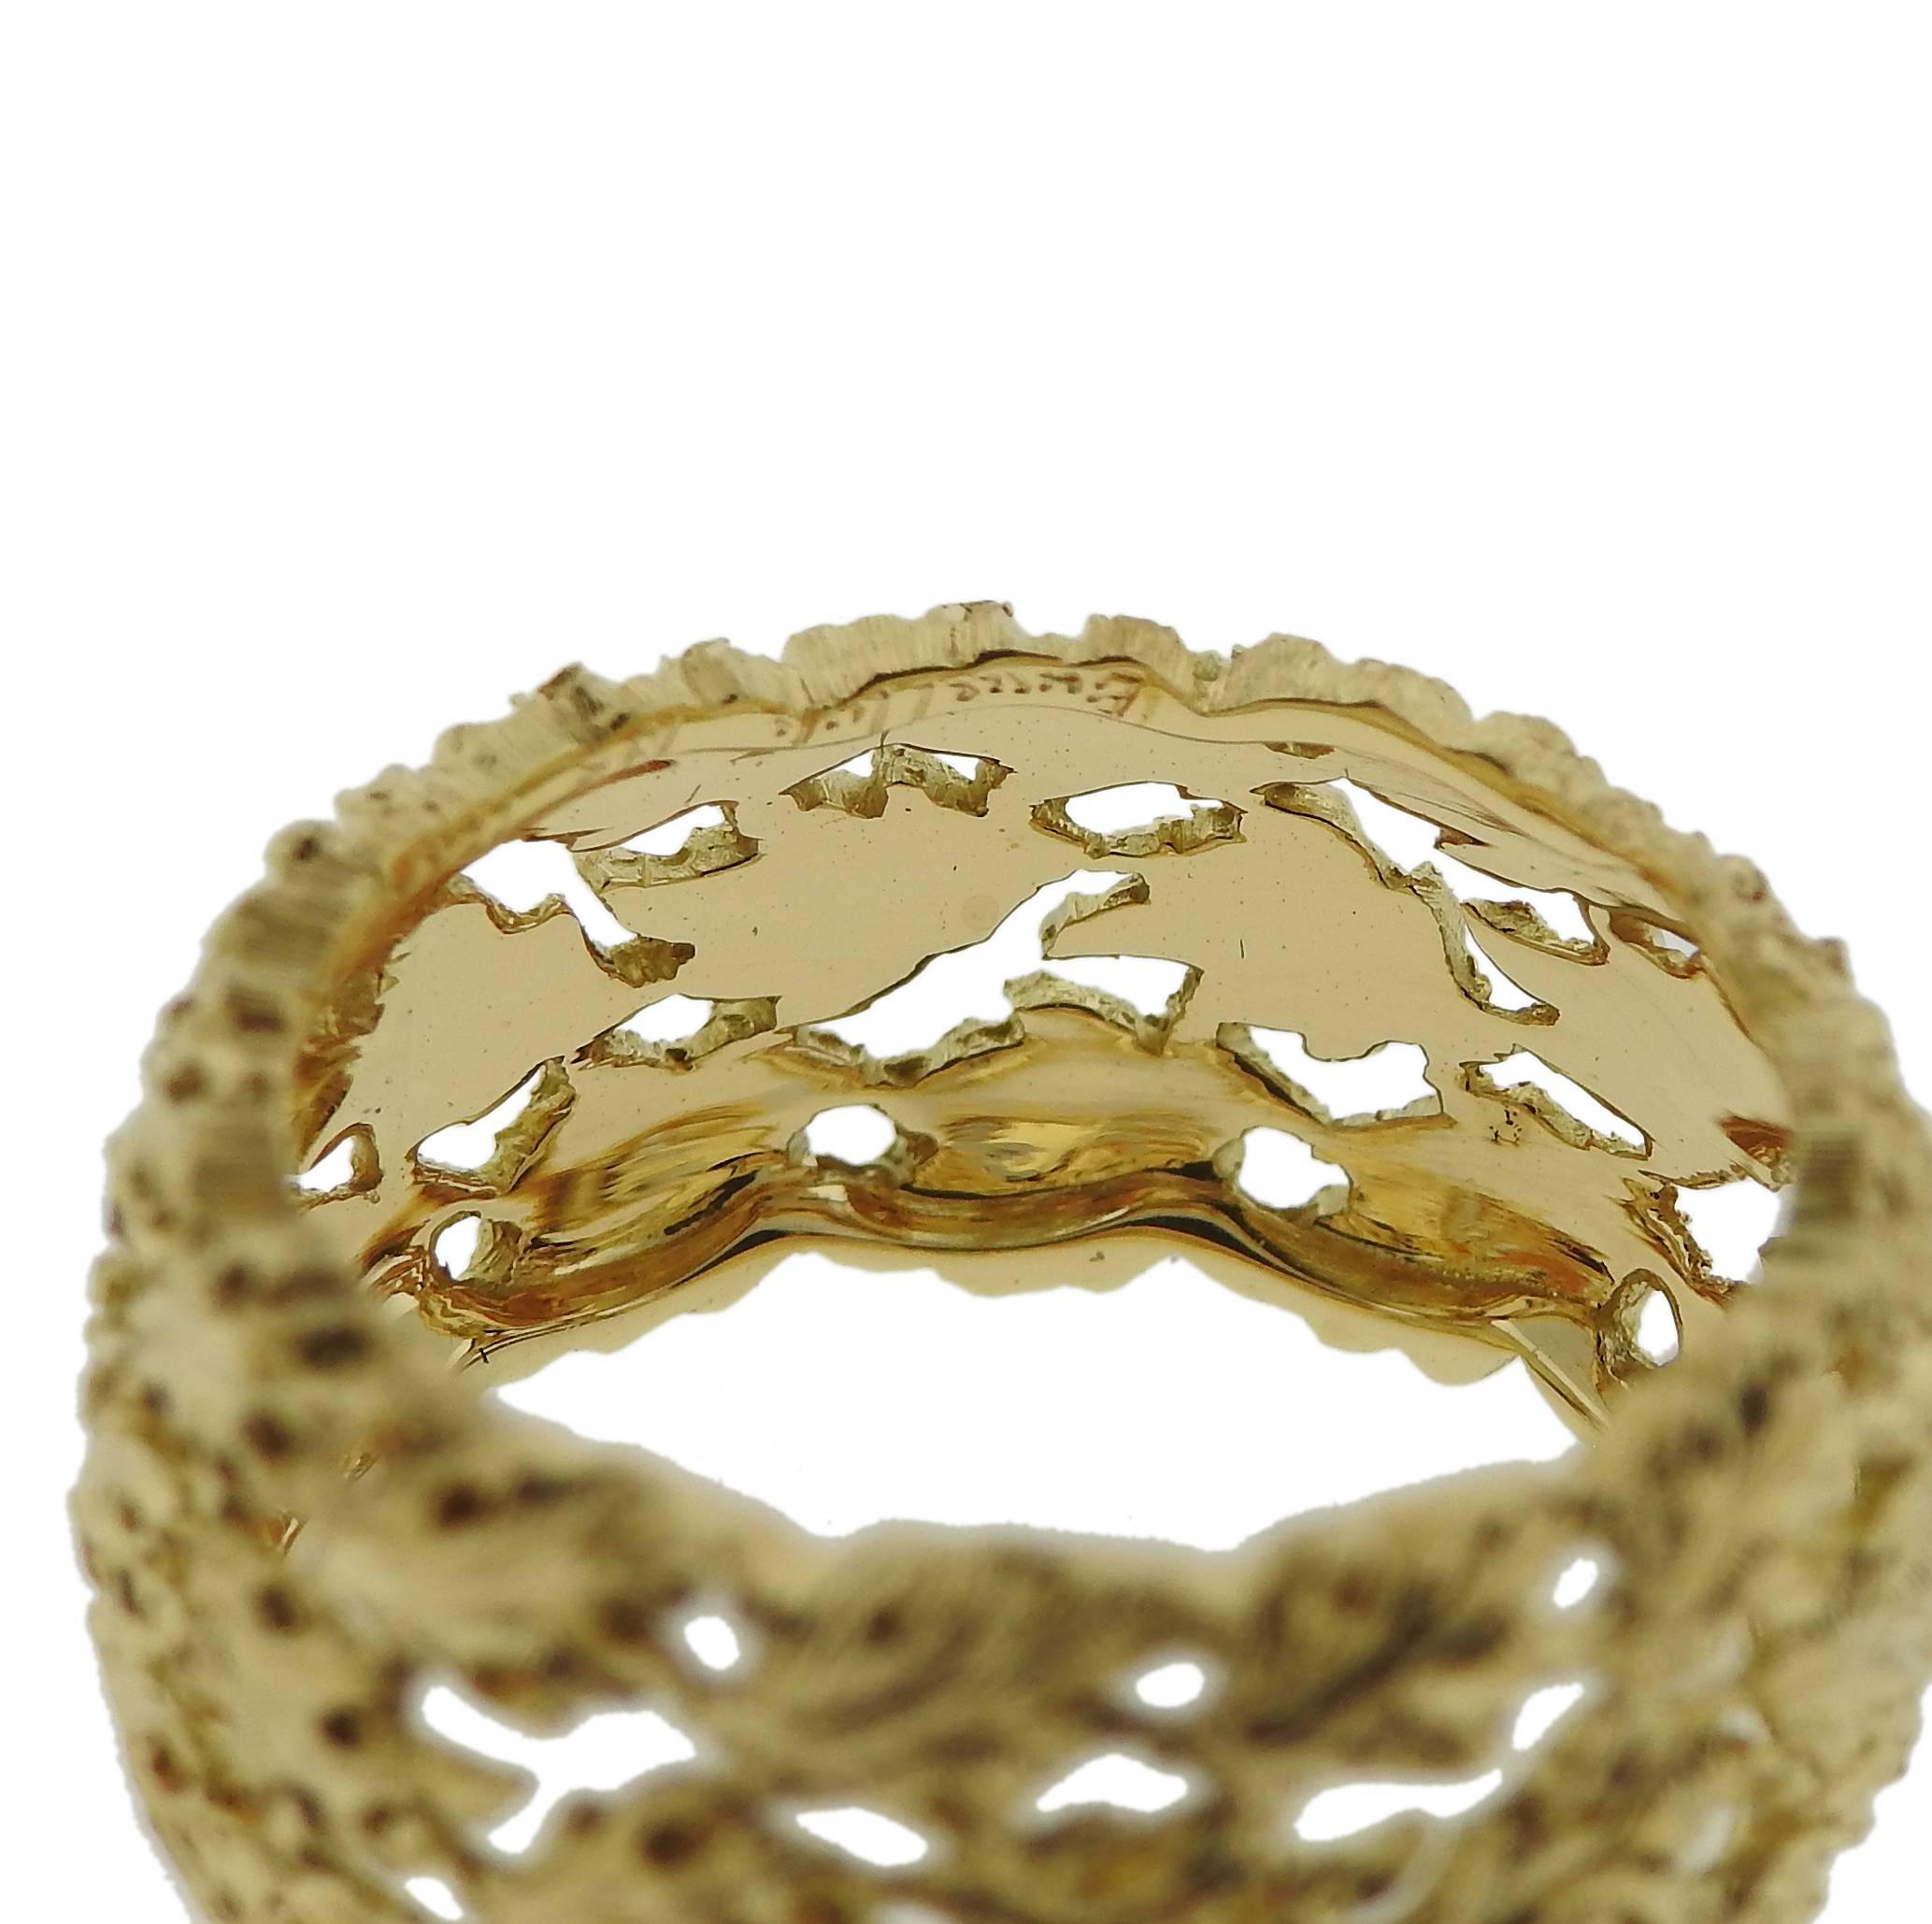 18k yellow gold leaf motif band ring, crafted by Buccellati. Ring size 5 1/2, ring is 9mm wide  and weighs 4.9 grams. Marked: T6511, Italy 18k,  Buccellati . 
